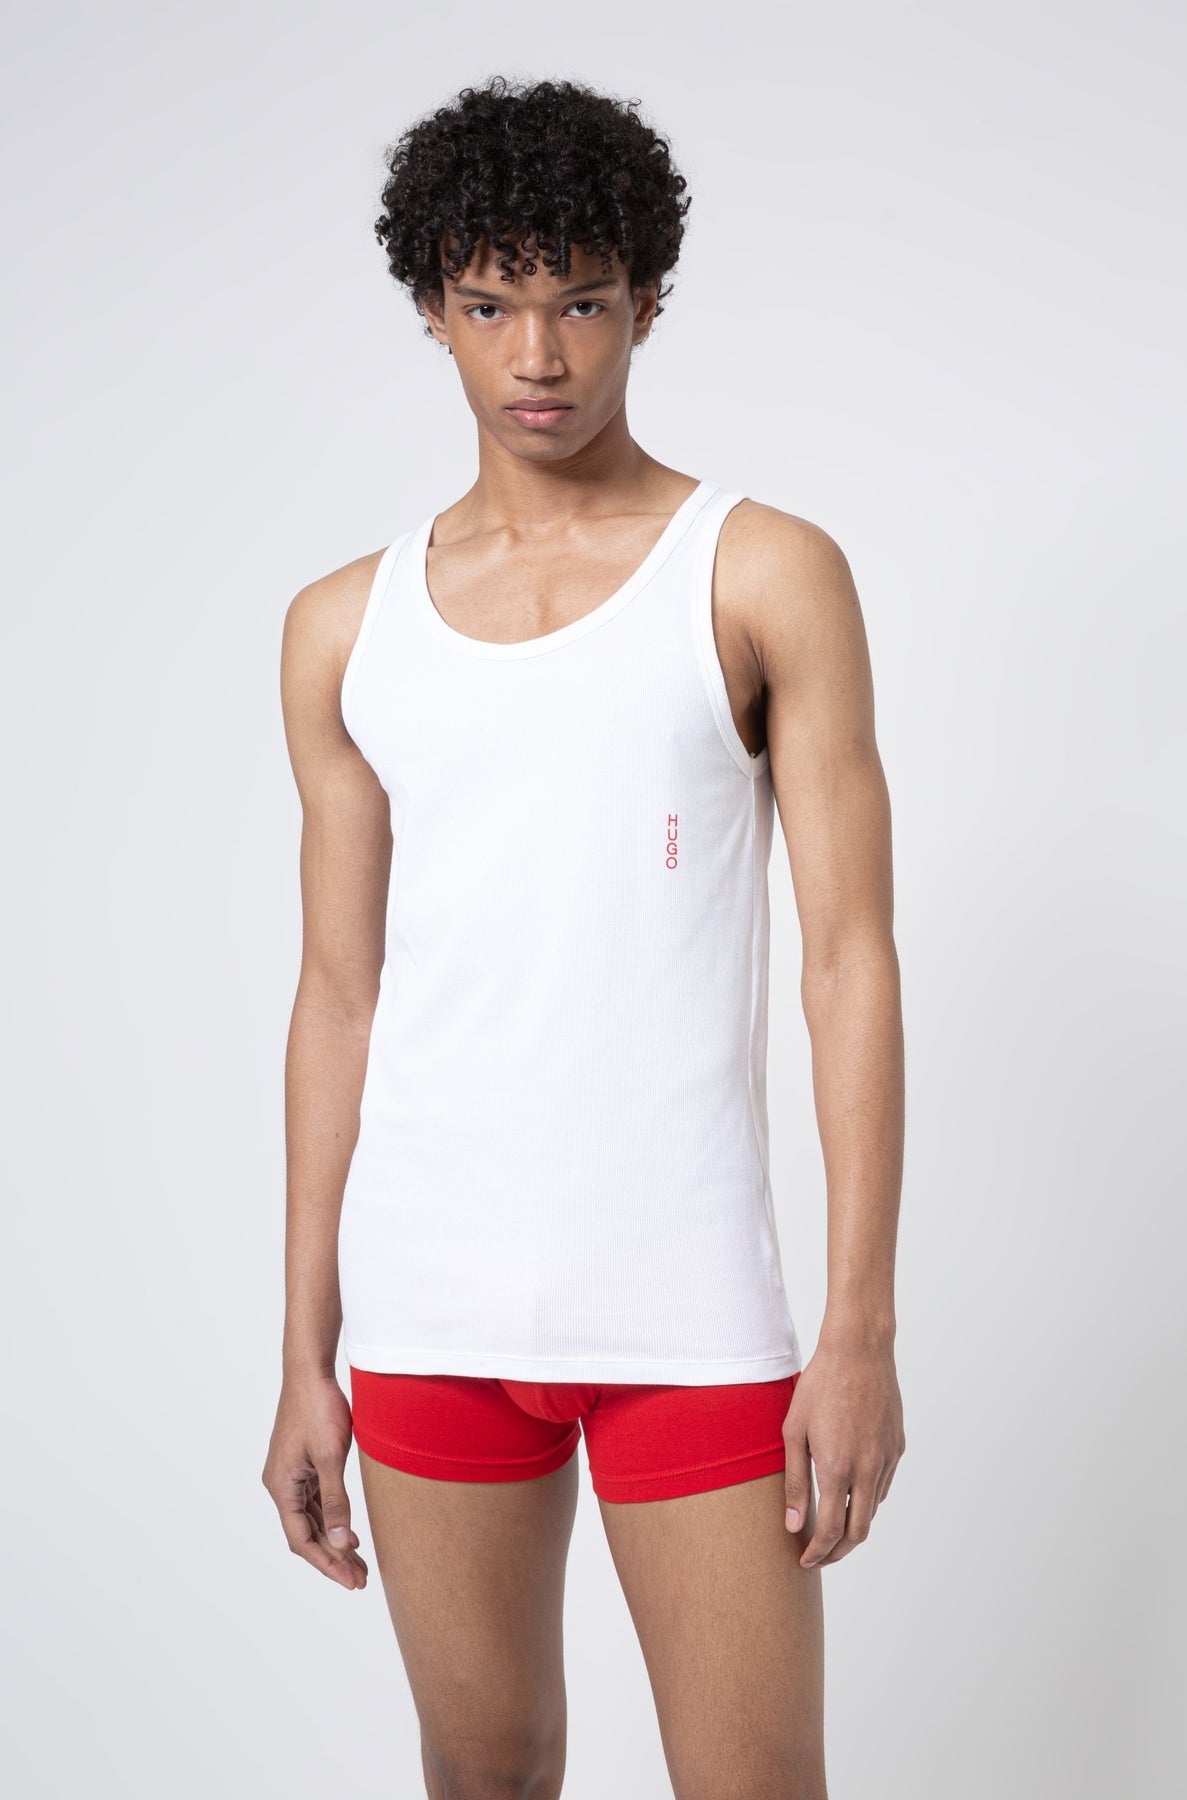 HUGO Slim Fit Tank Tops in Cotton Mix - TANK TOP TWIN PACK 10217231  01-50408126 from Concorde Fashion